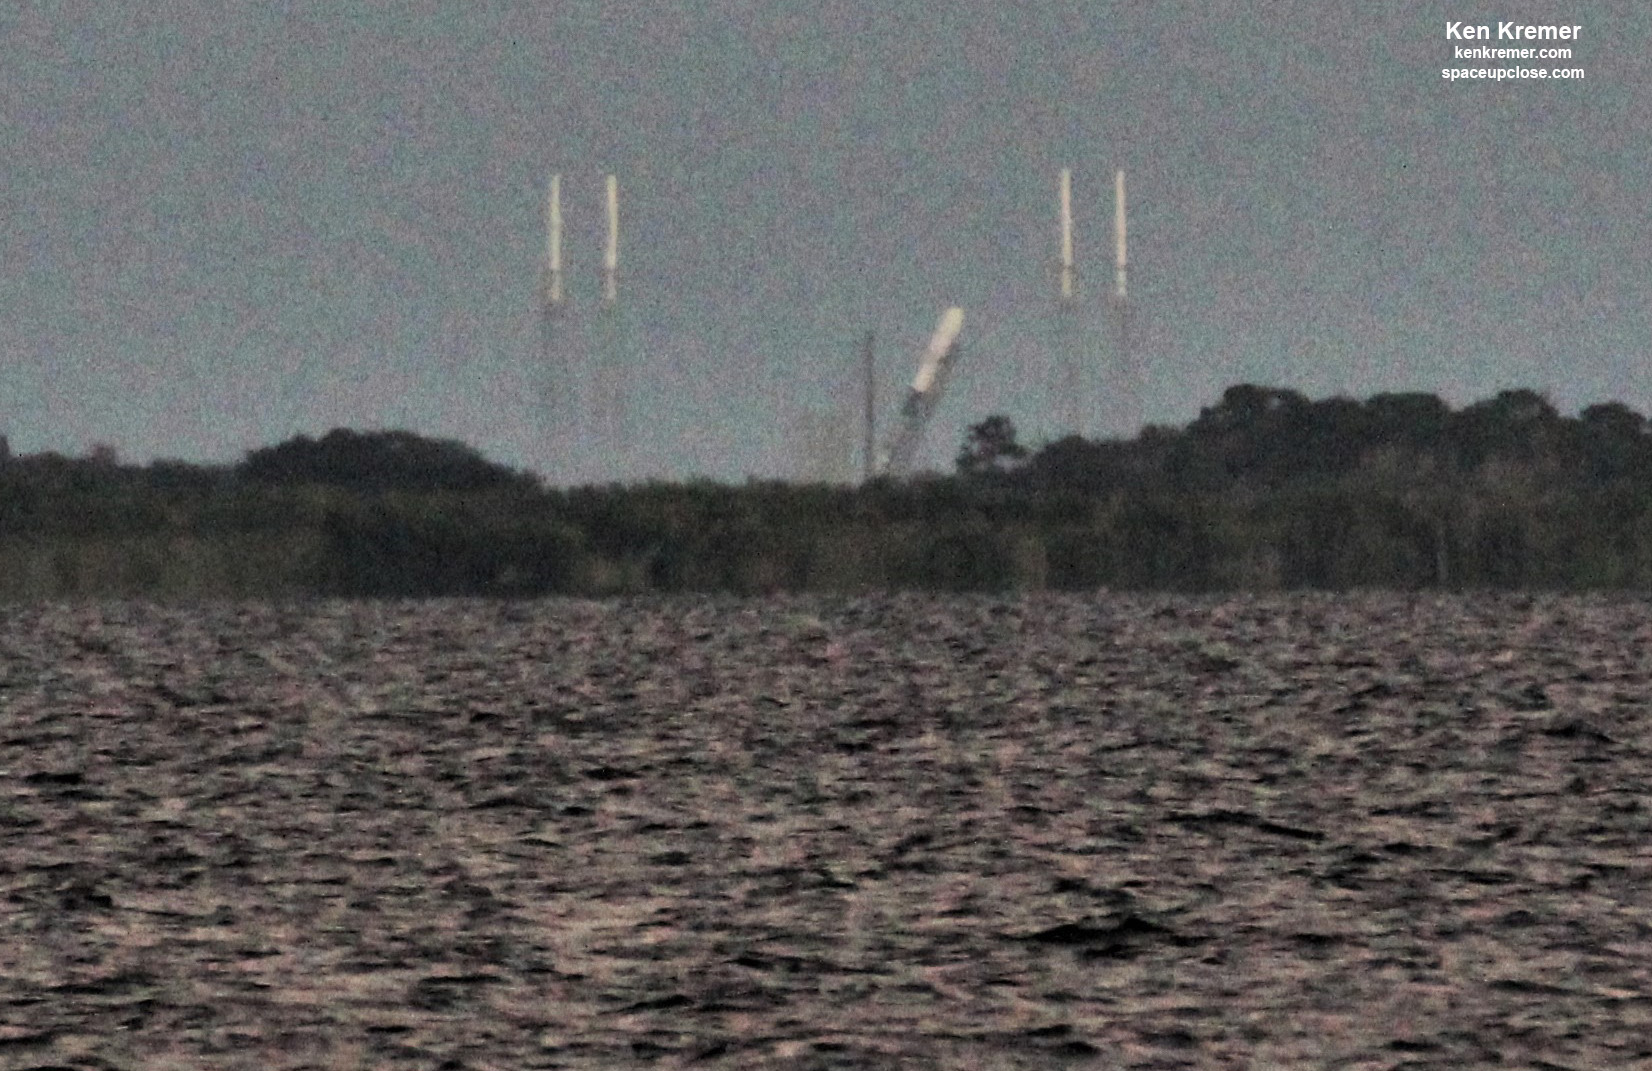 SpaceX Falcon 9 Goes Vertical at Sunset & Moonrise for Veterans Day Starlink Launch Nov 11 with Reused Booster and Fairings: Photos